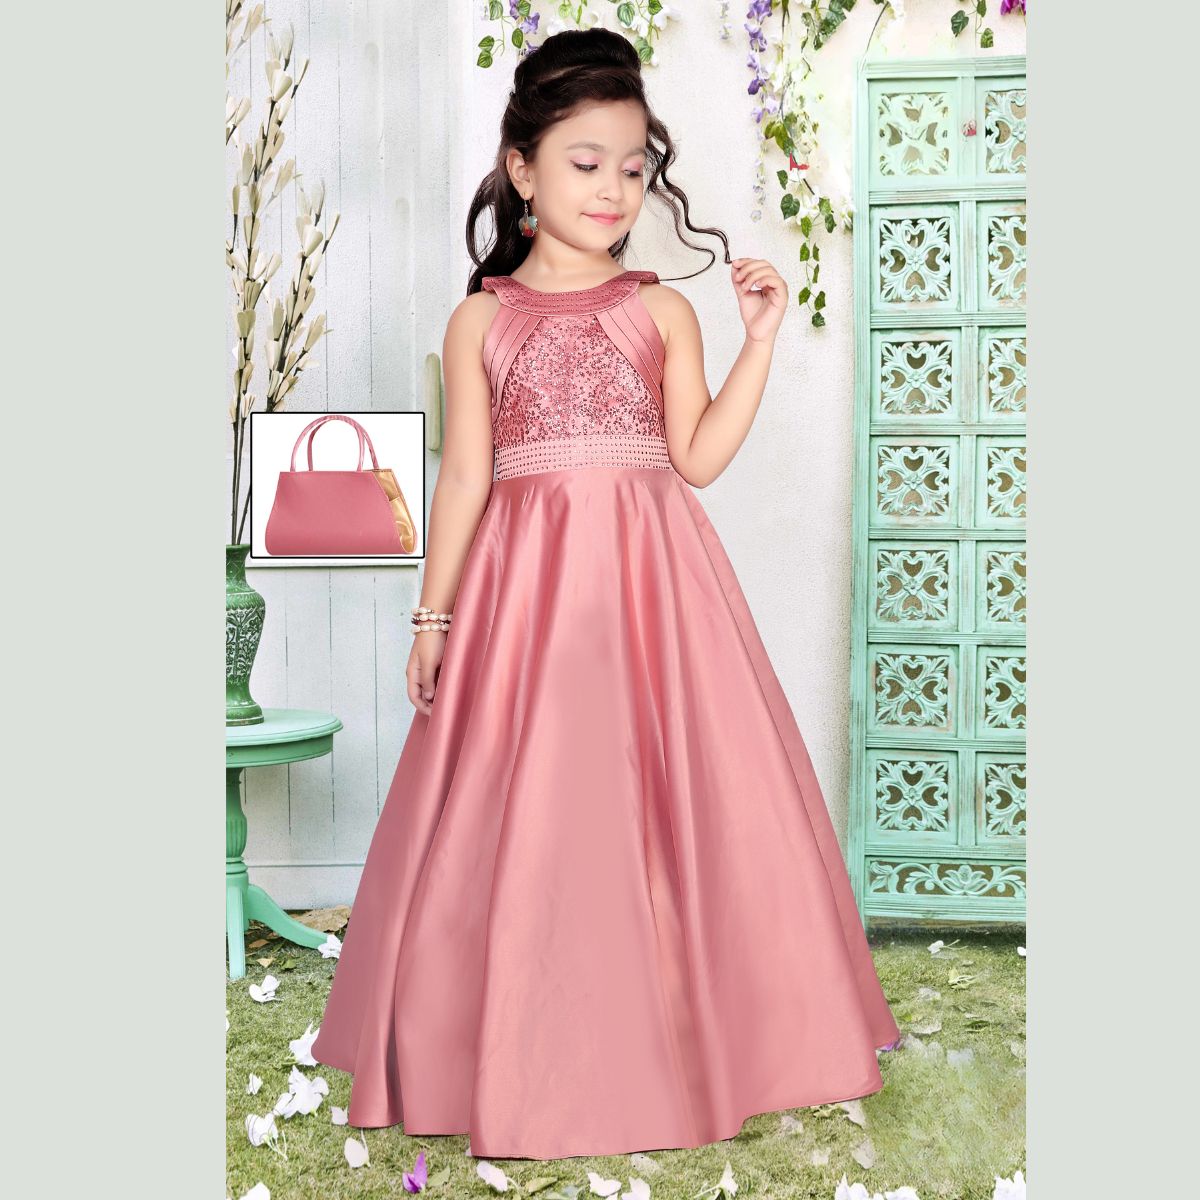 Girls Party wear gown